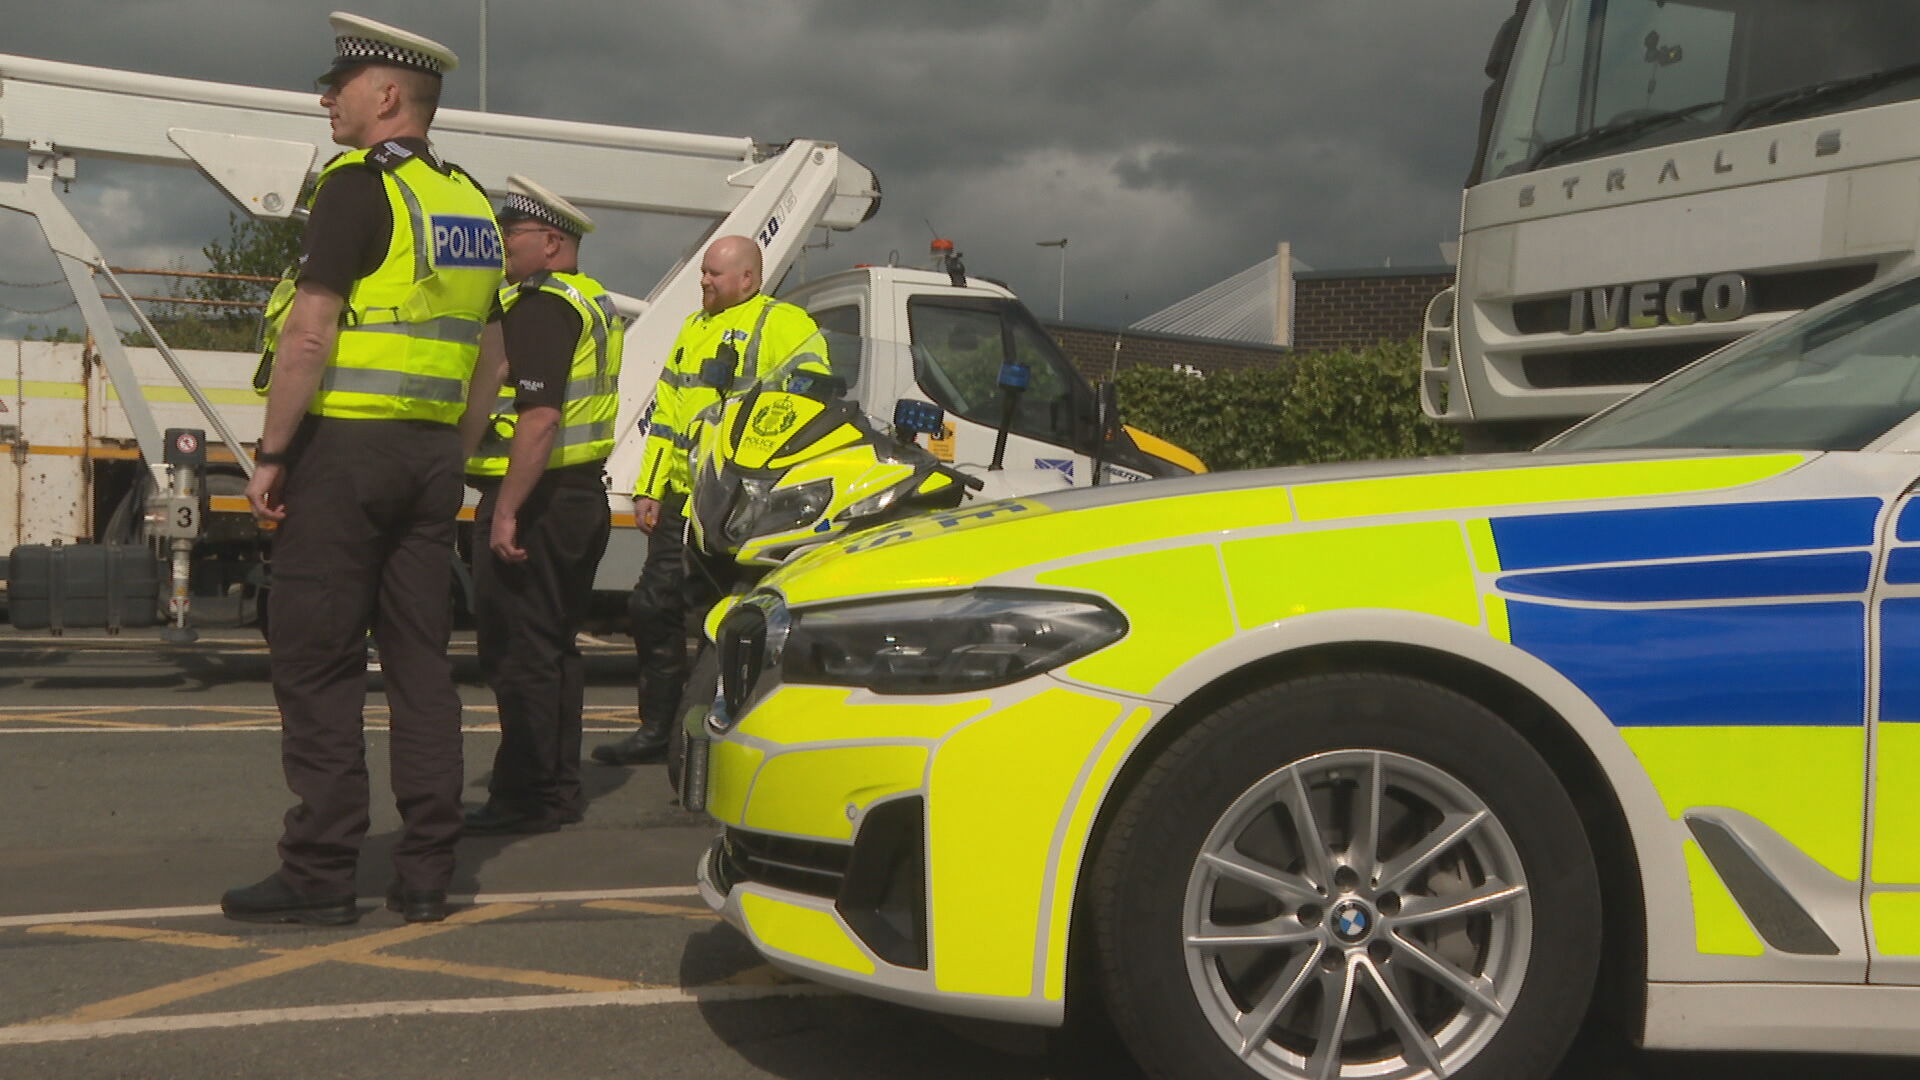 Police say 36 drivers have been warned over various offences in the last two weeks